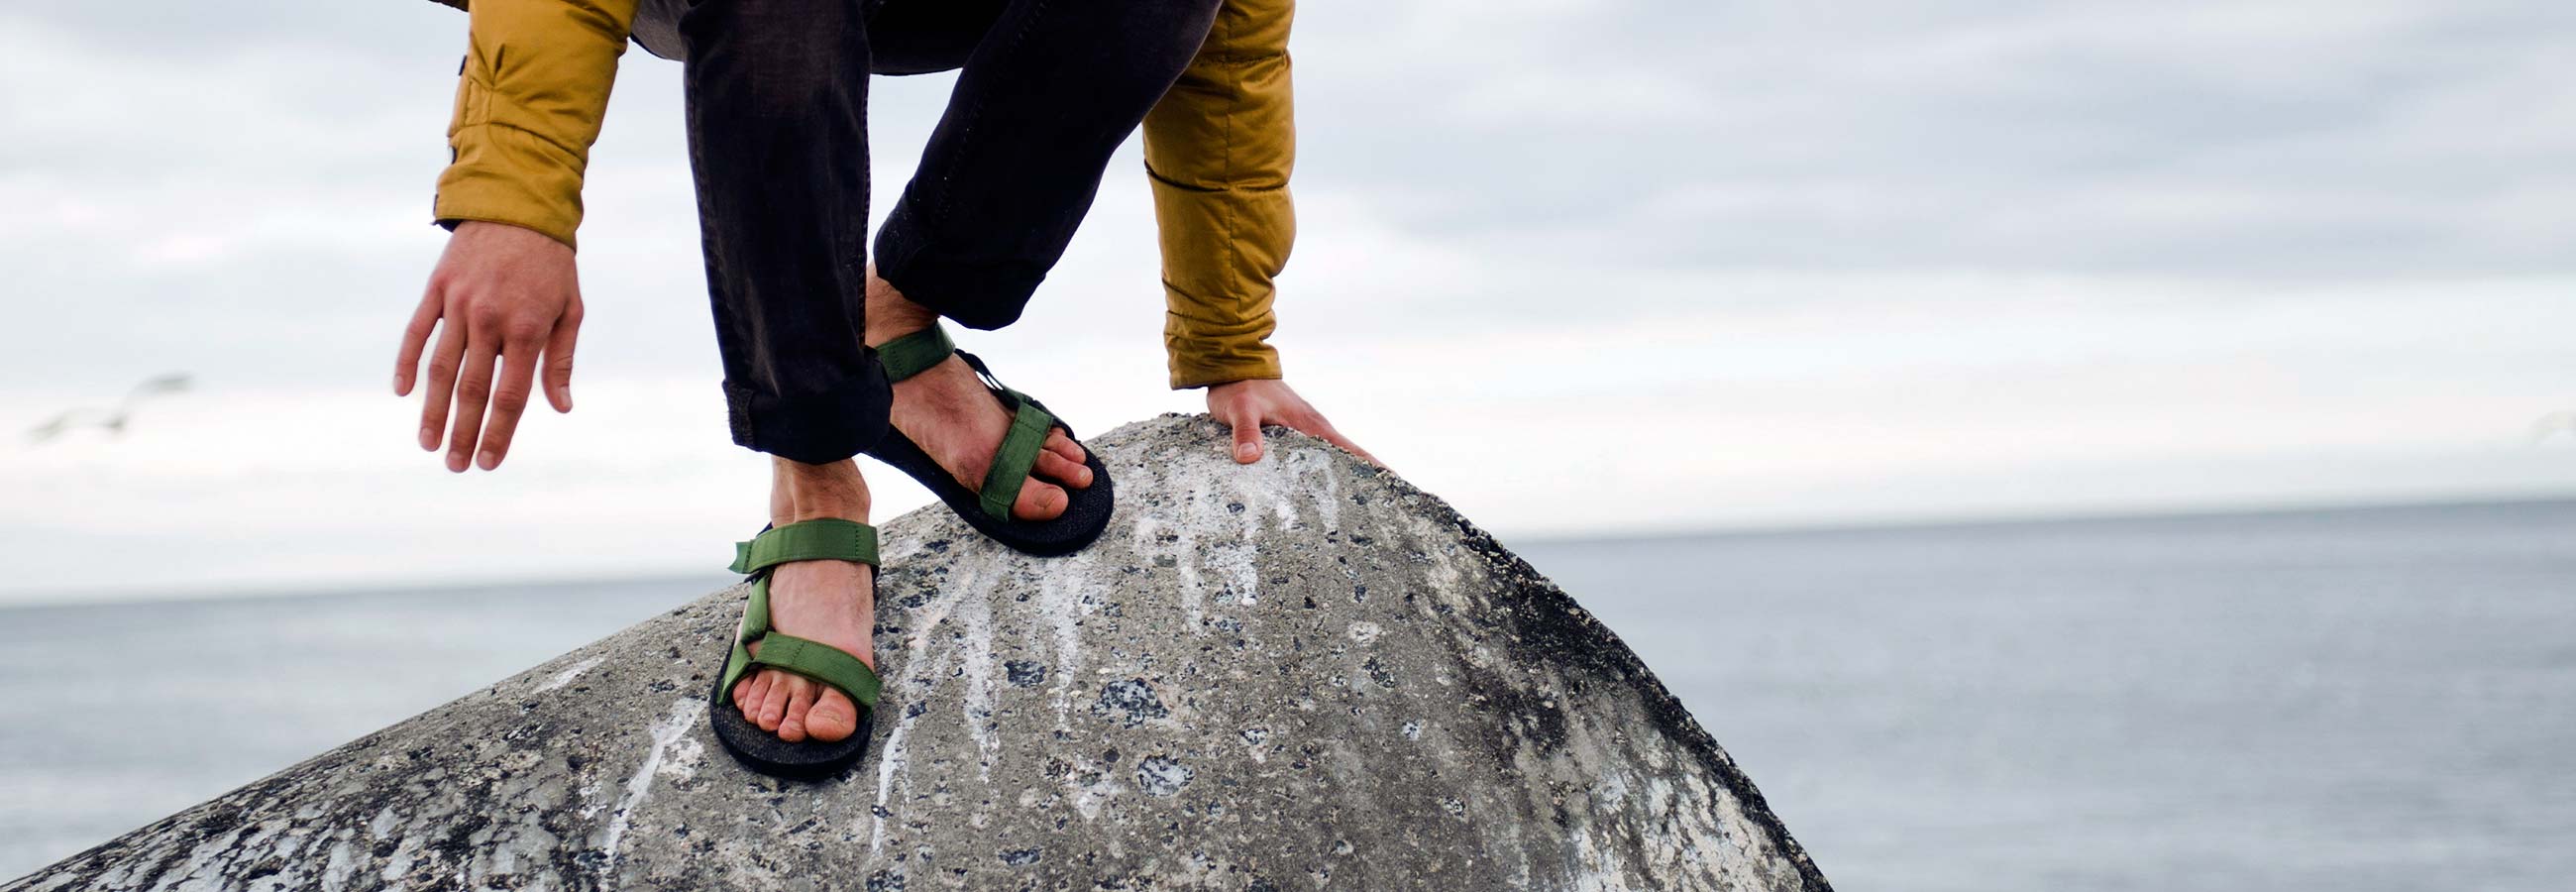 Lower half of person wearing Teva sandals climbing down a boulder overlooking the ocean.